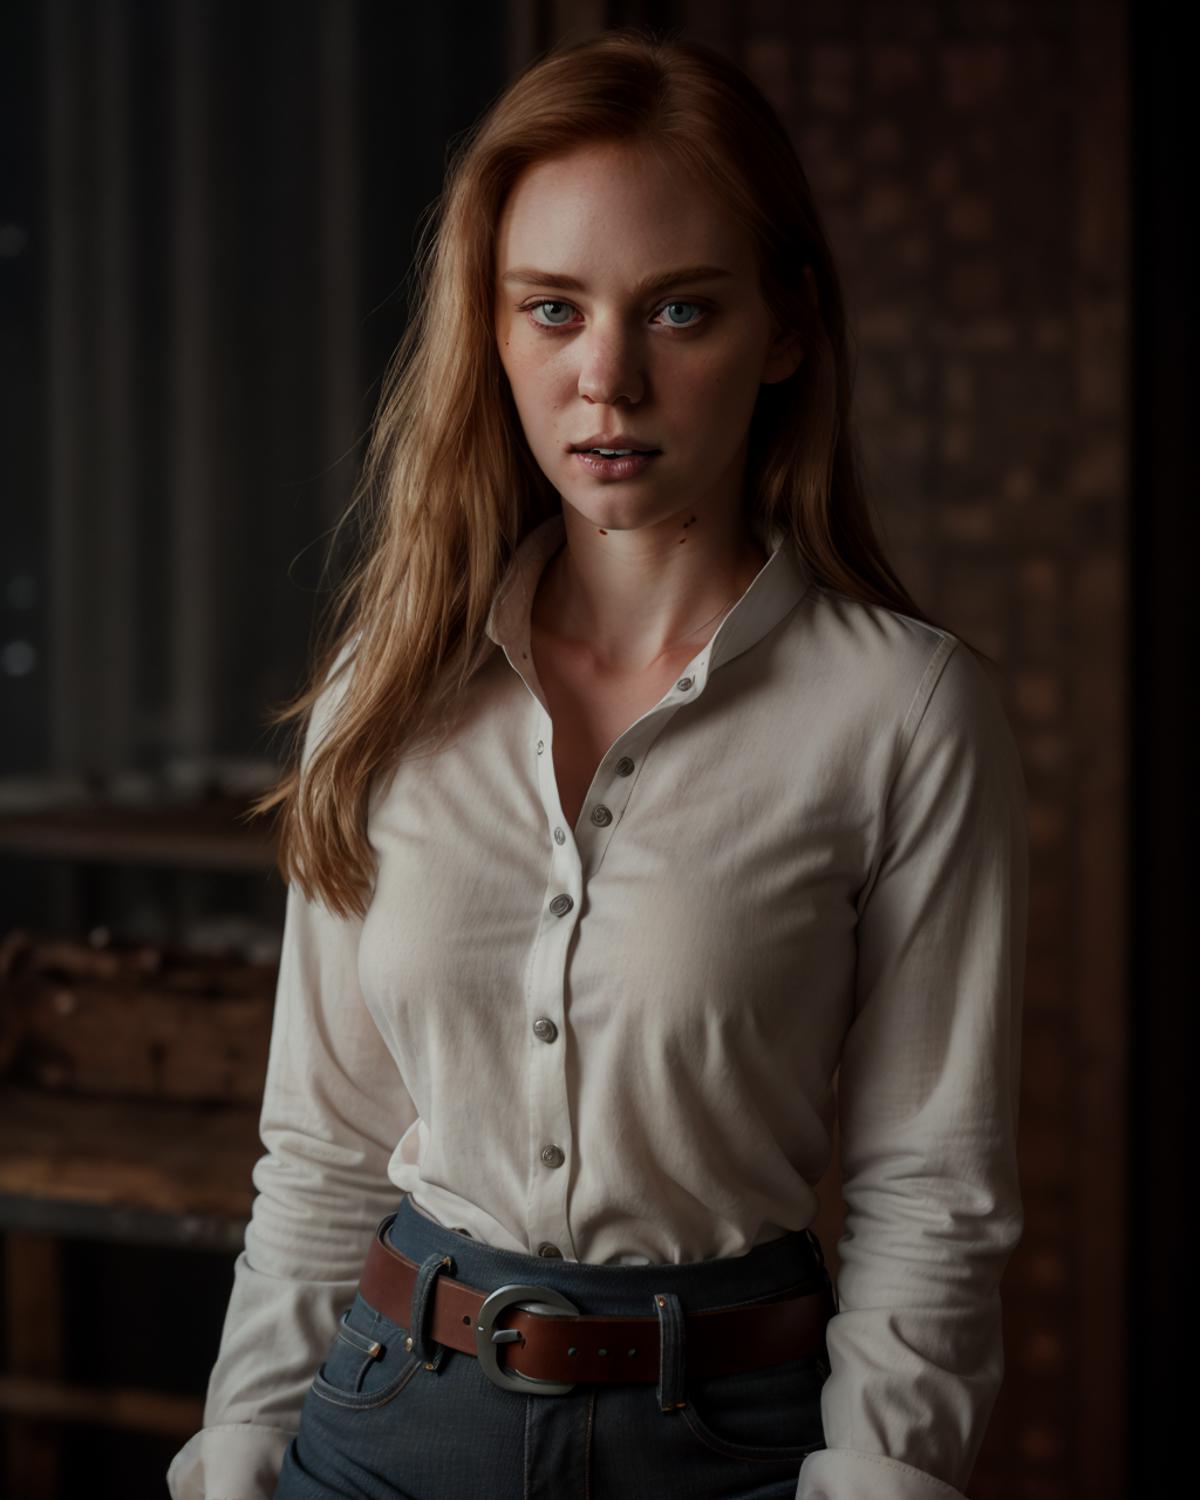 Deborah Ann Woll (Jessica Hamby from True Blood & Karen Page in Marvel's Daredevil TV shows) image by halilzeus113